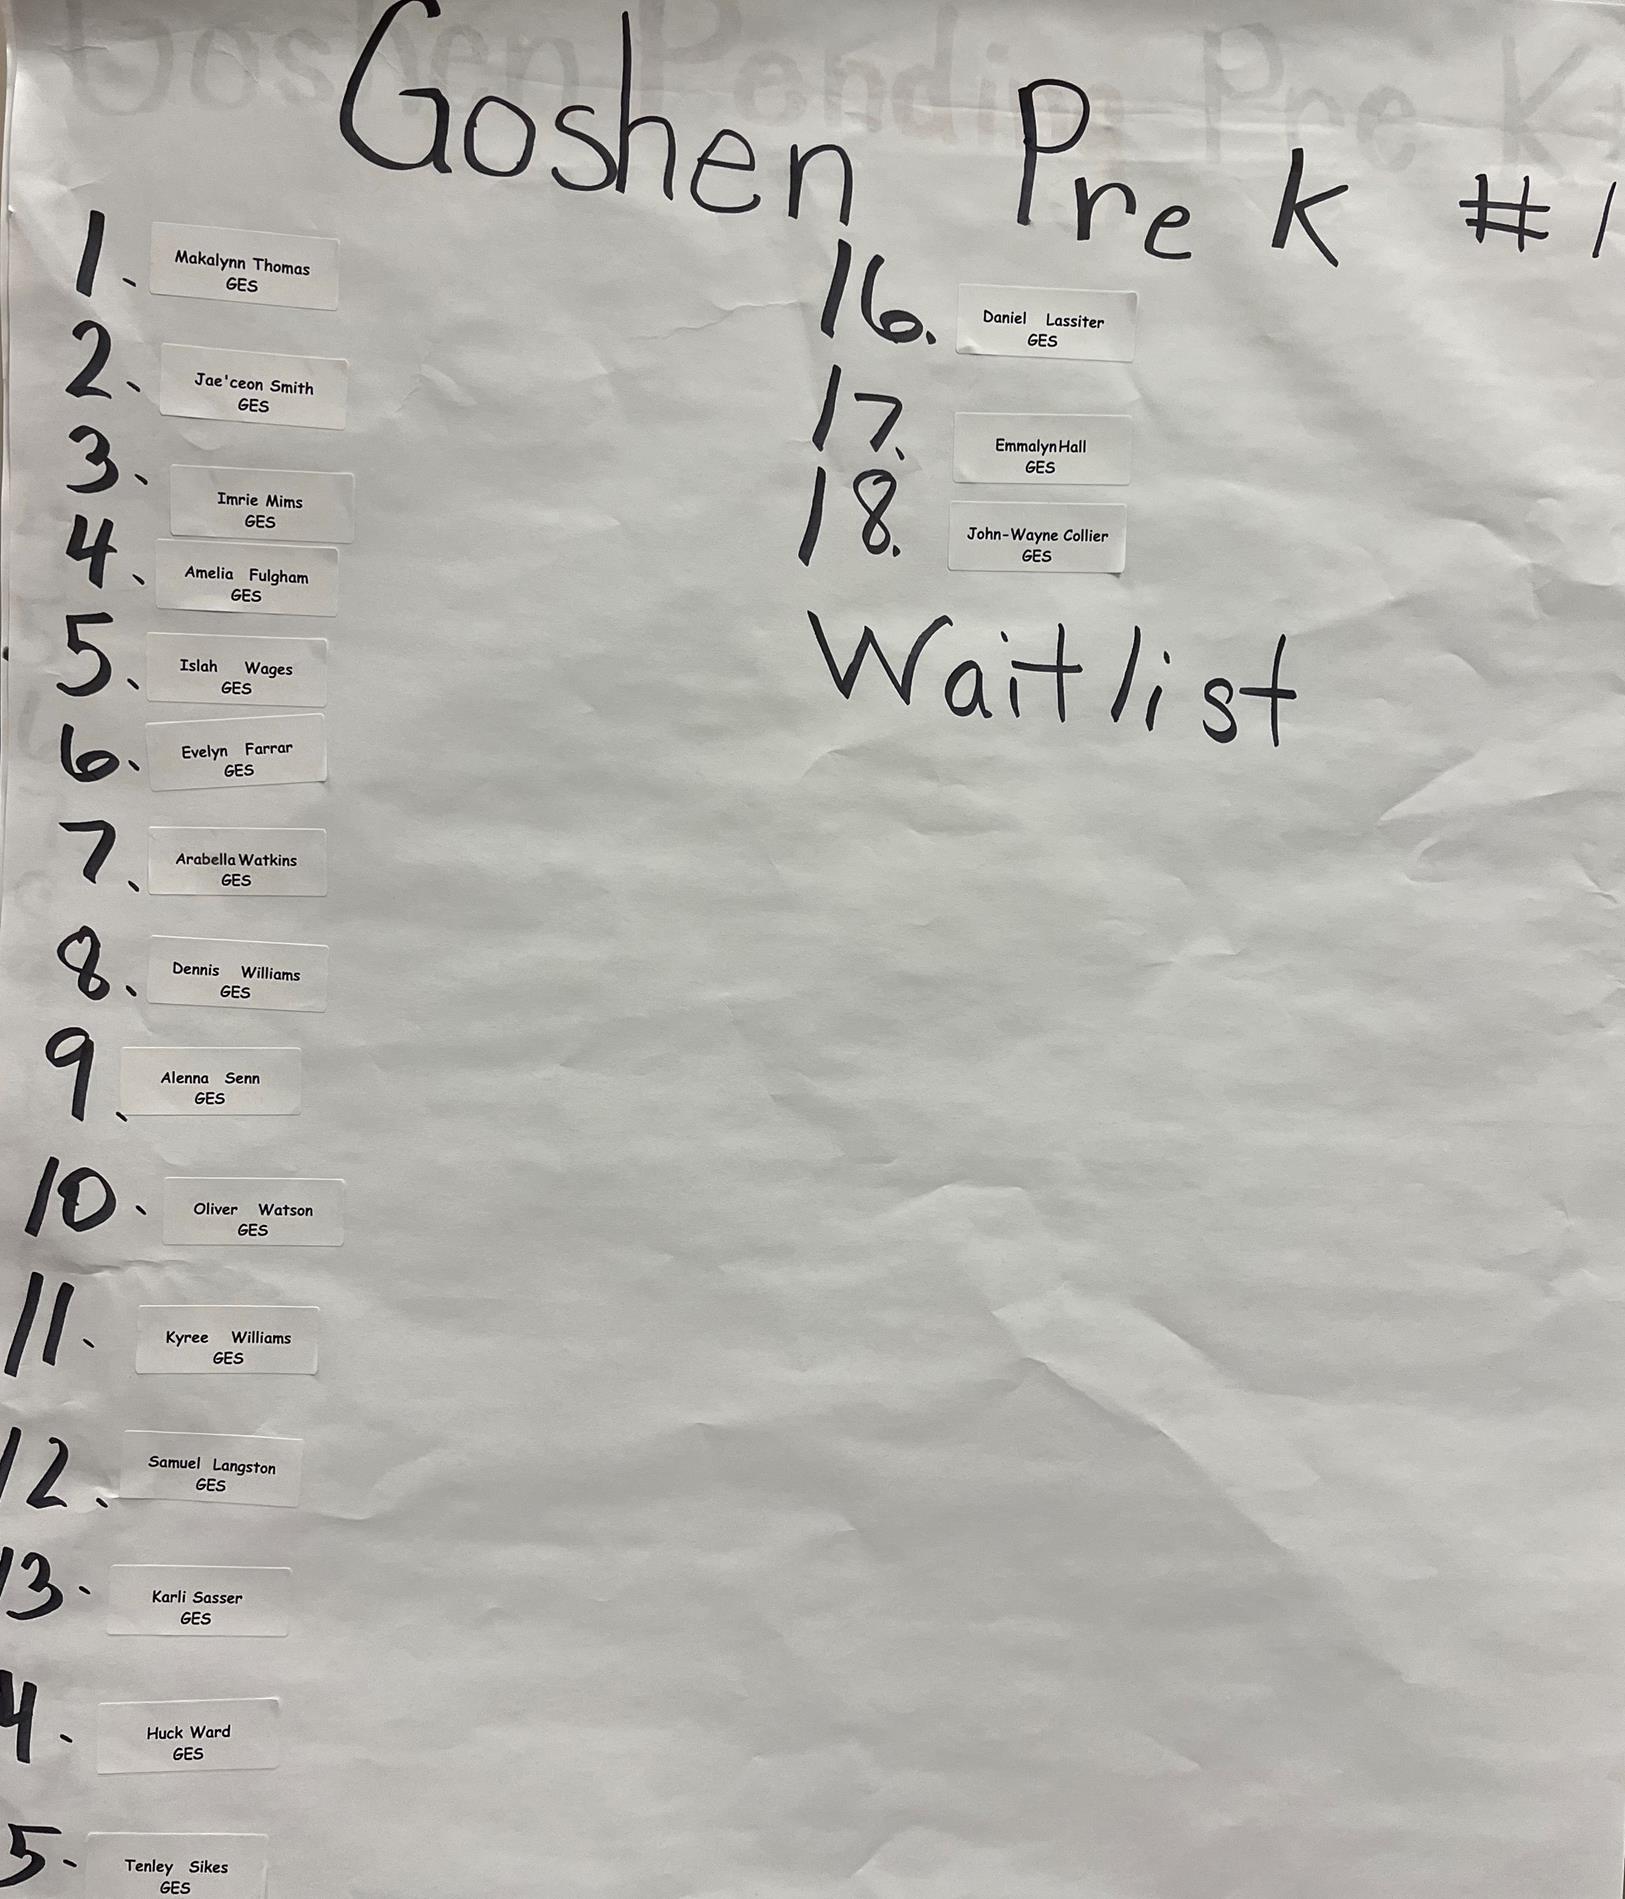 Pre-K Lottery Results